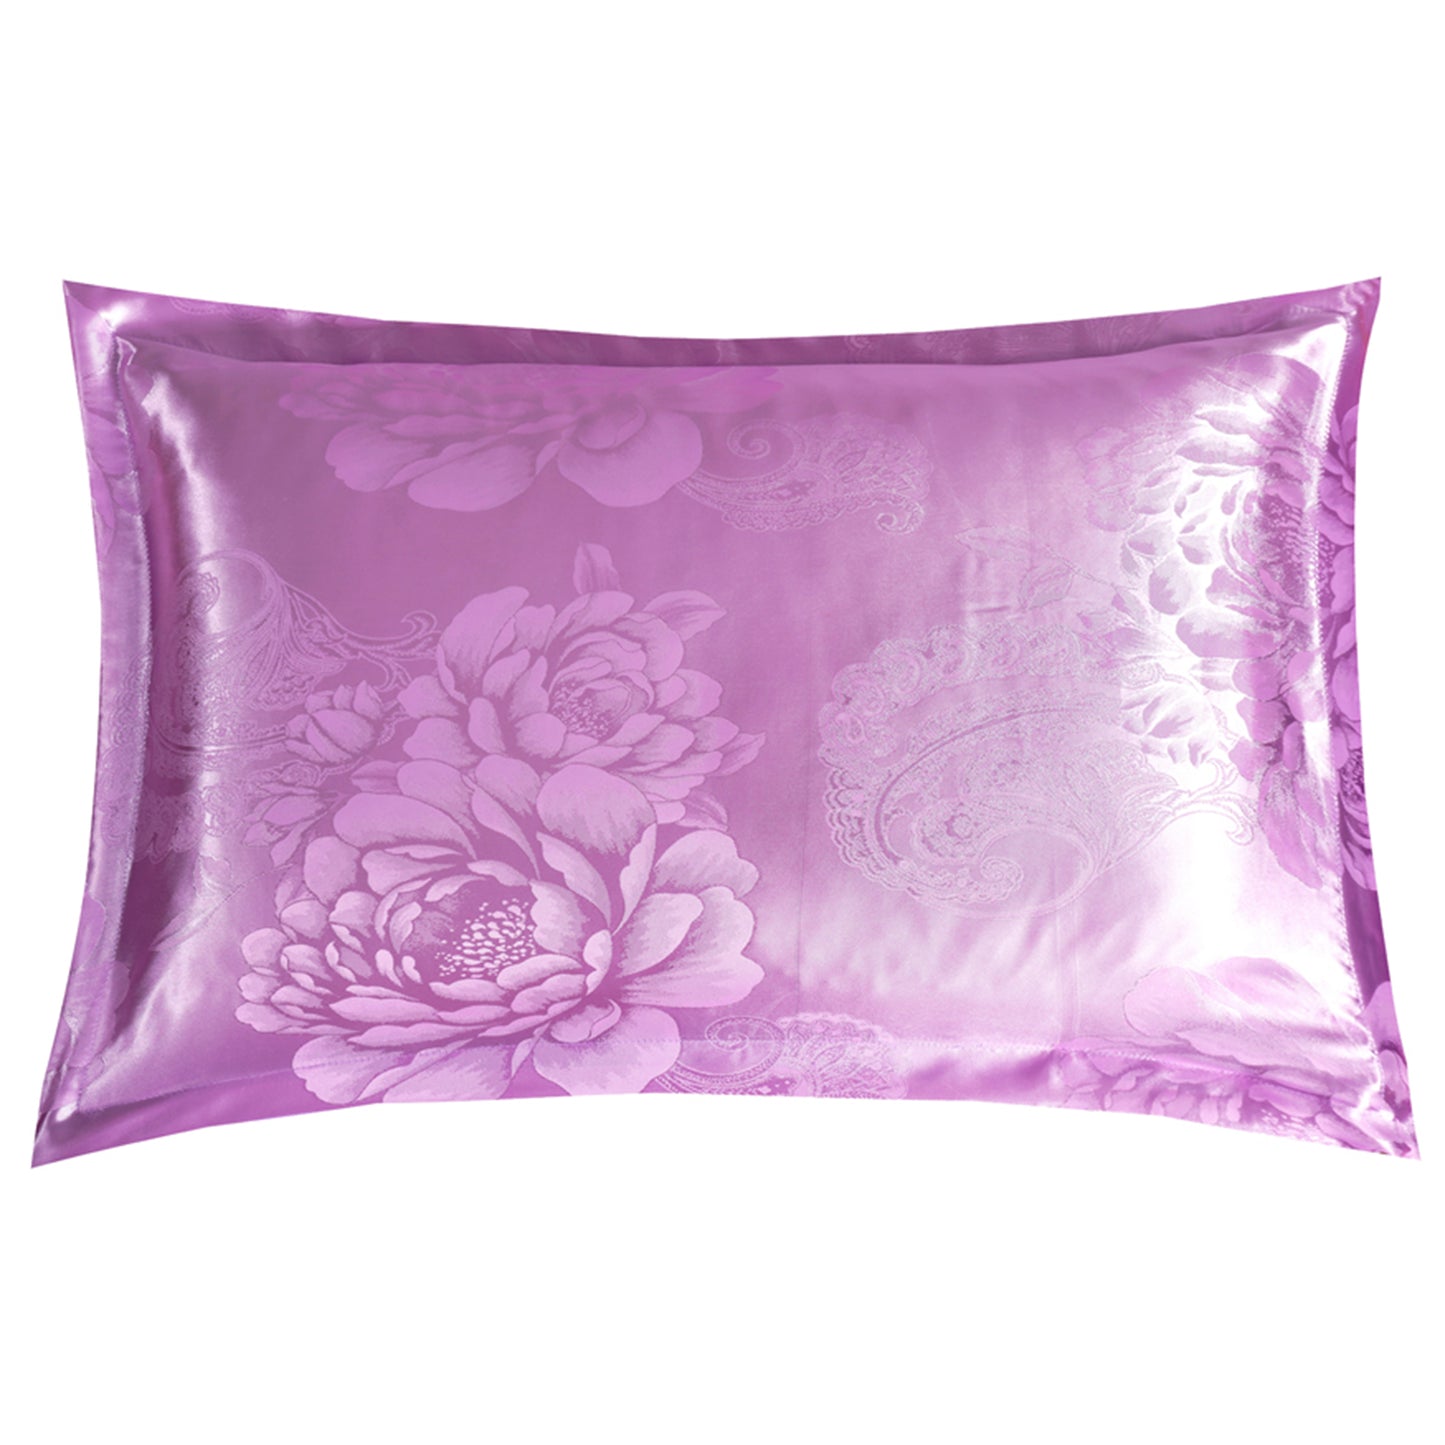 WONGS BEDDING Light Purple Embroidery Satin Craft Duvet Cover Set With 2 Pillow Case